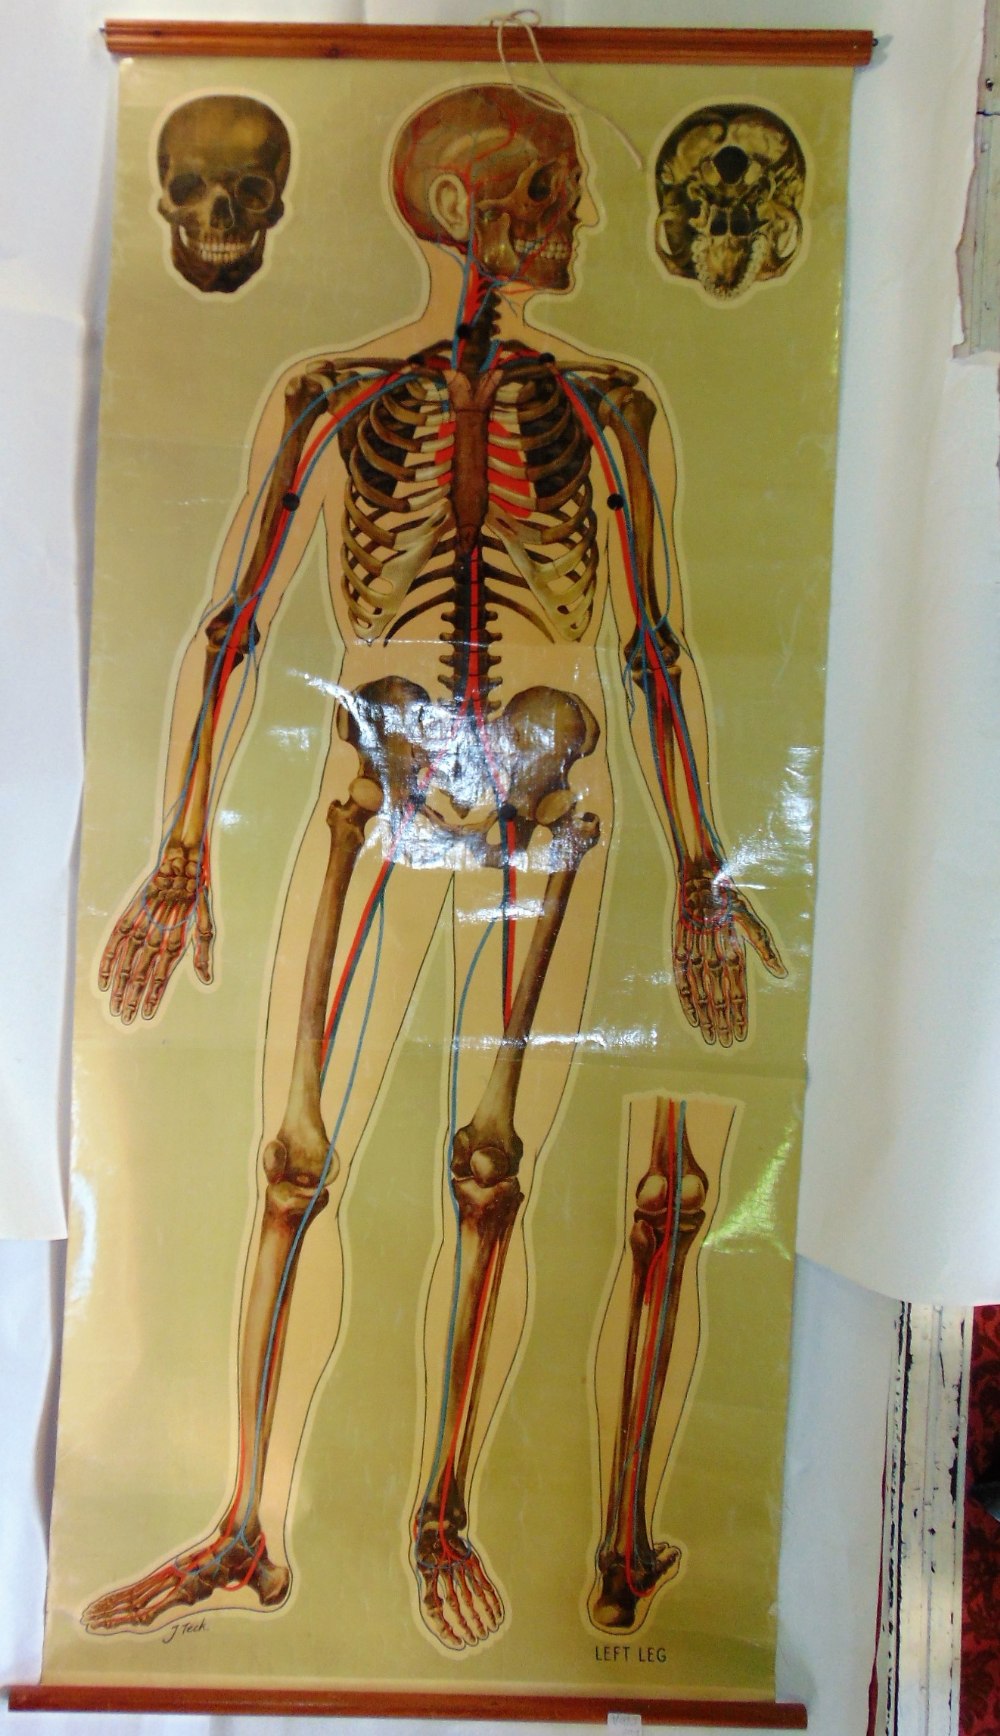 An anatomical print of the human skeleton (about life size) laid on canvas - J Teck